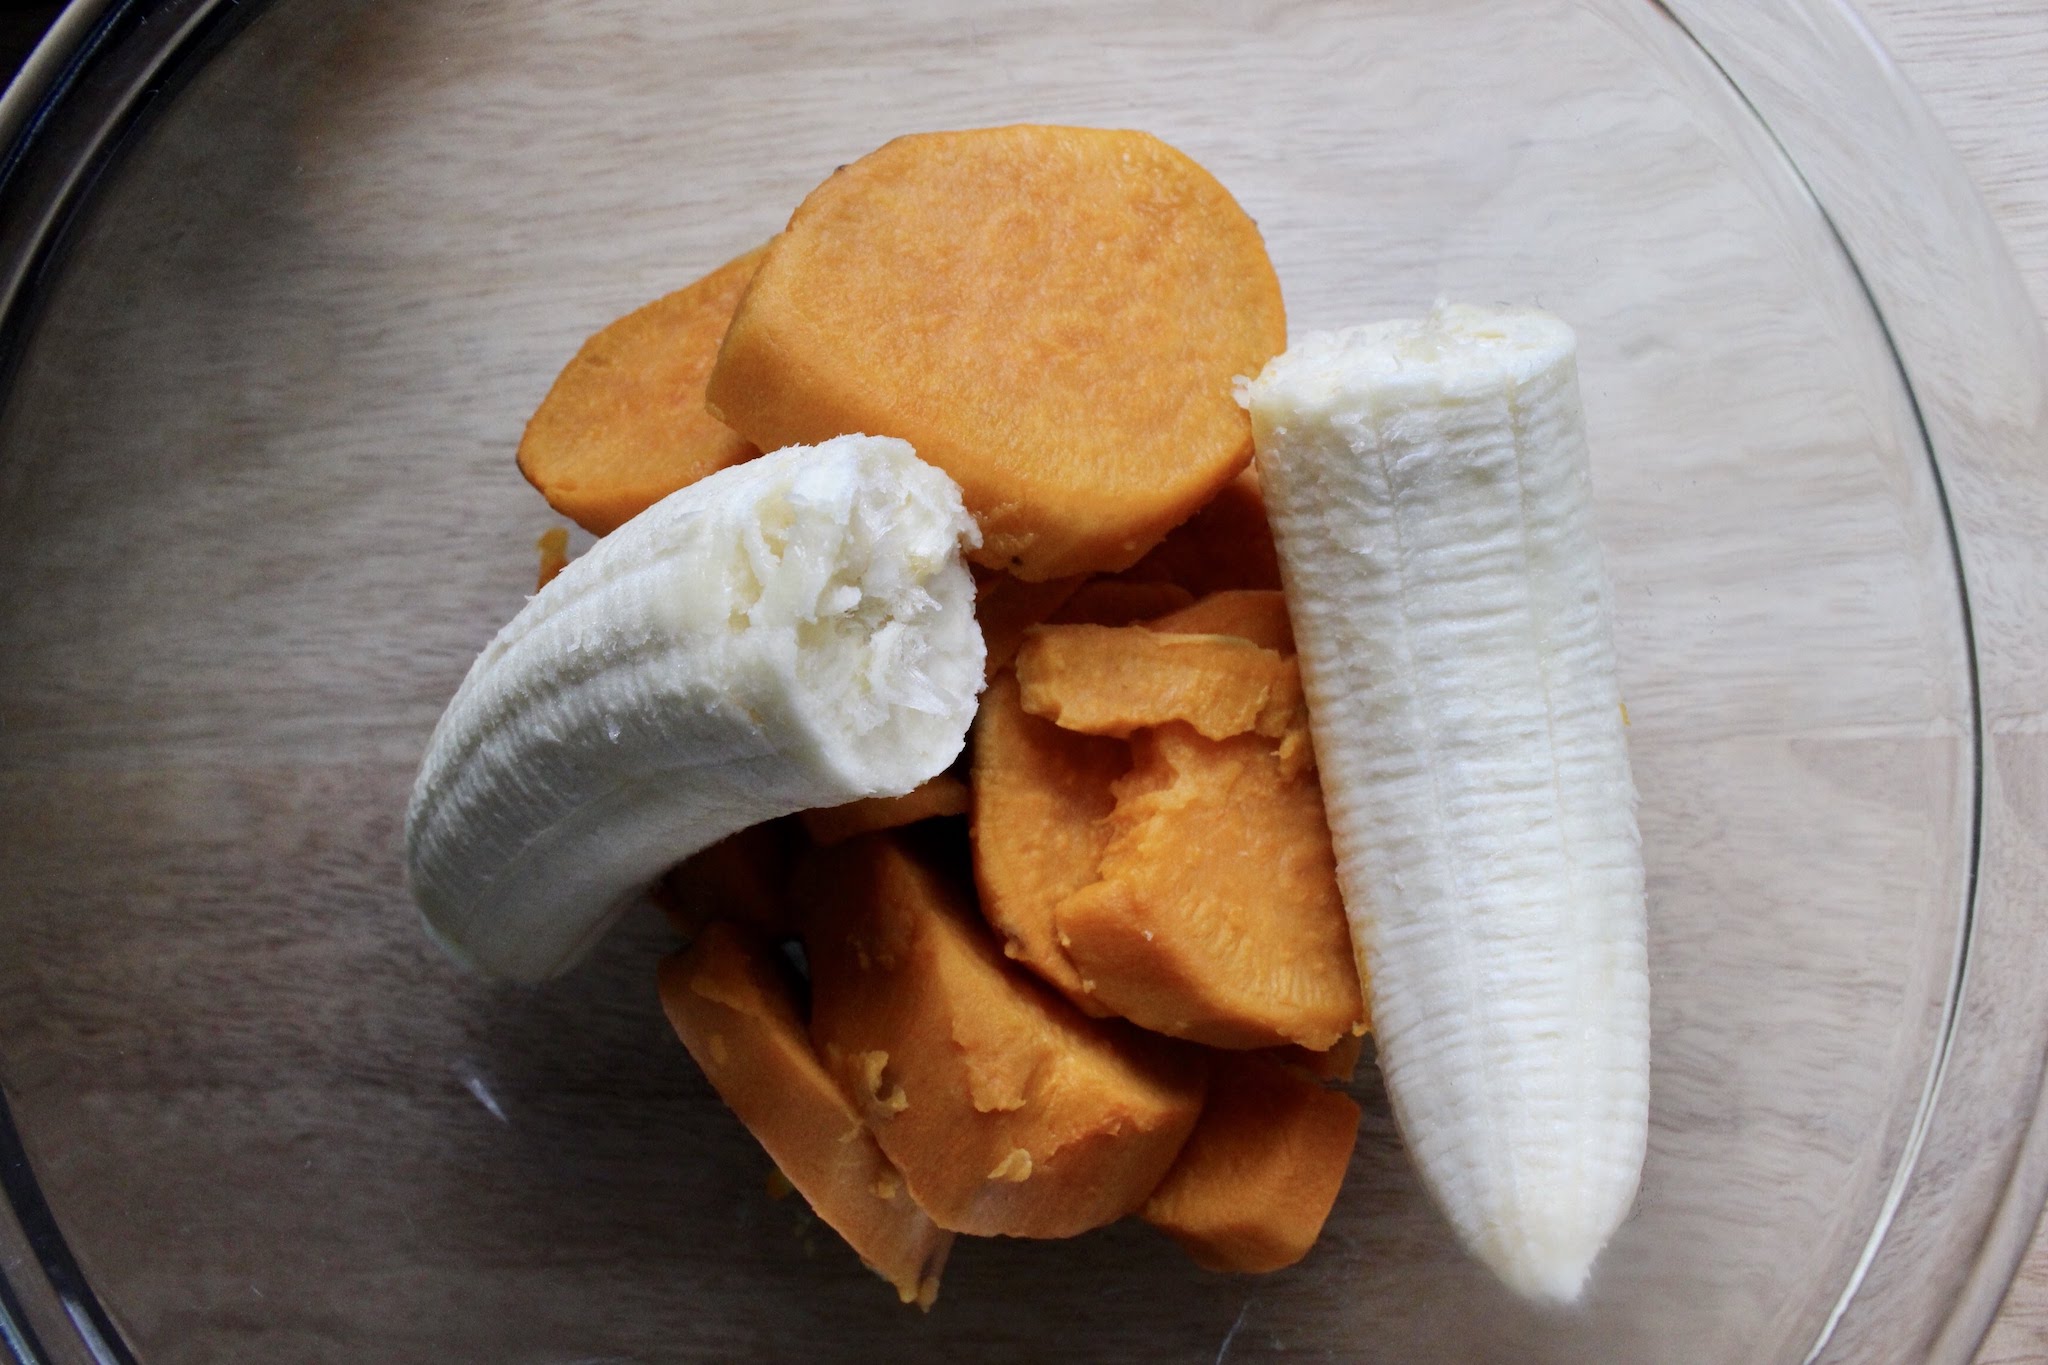 Homemade Sweet Potato Banana Baby Food by popular New Jersey foodie blog What's For Dinner Esq.